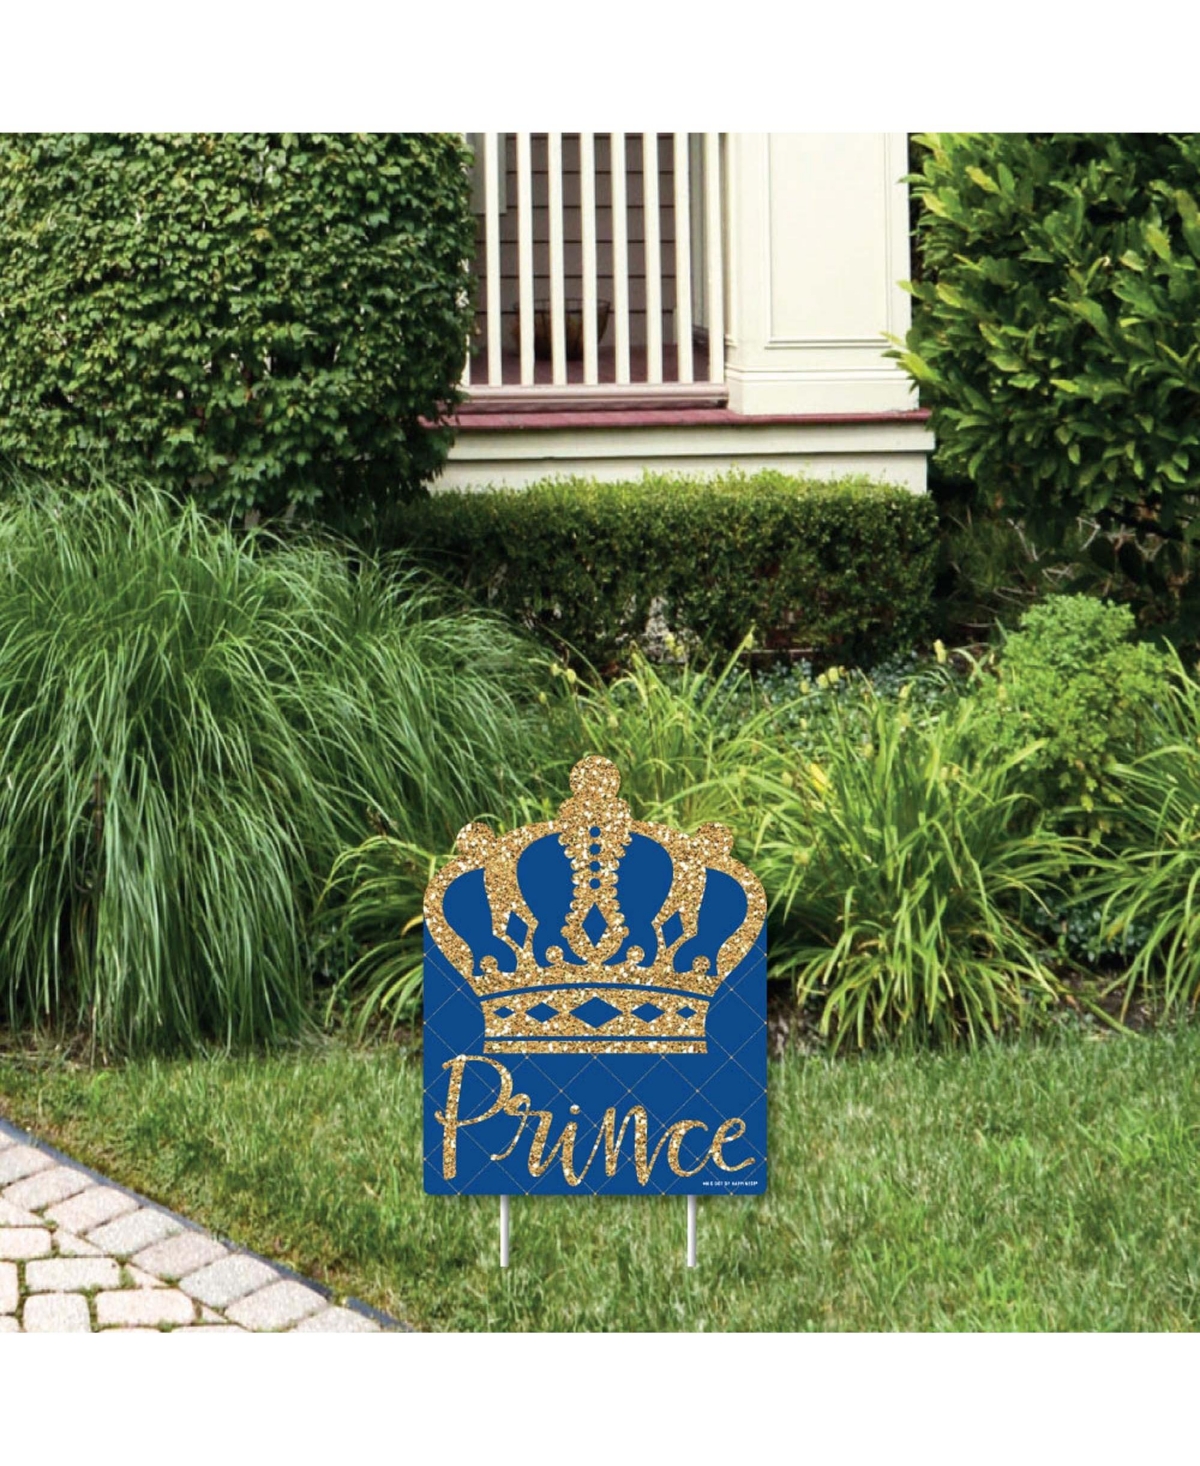 Royal Prince Charming - Outdoor Lawn Sign - Party Yard Sign - 1 Pc